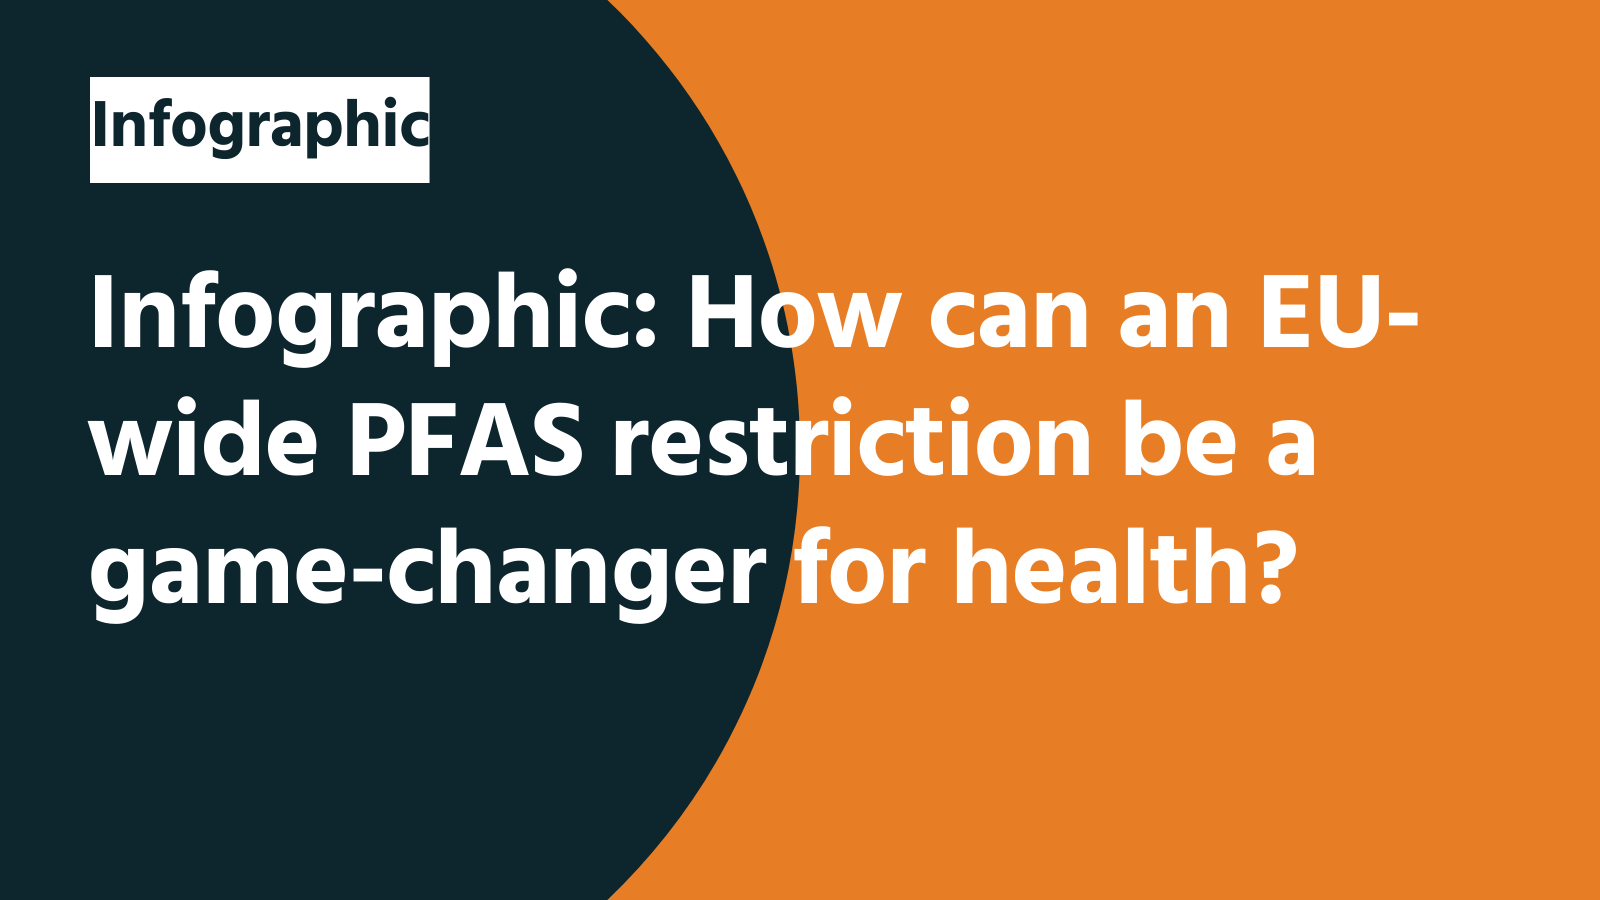 Infographic: How can an EU-wide PFAS restriction be a game-changer for health?